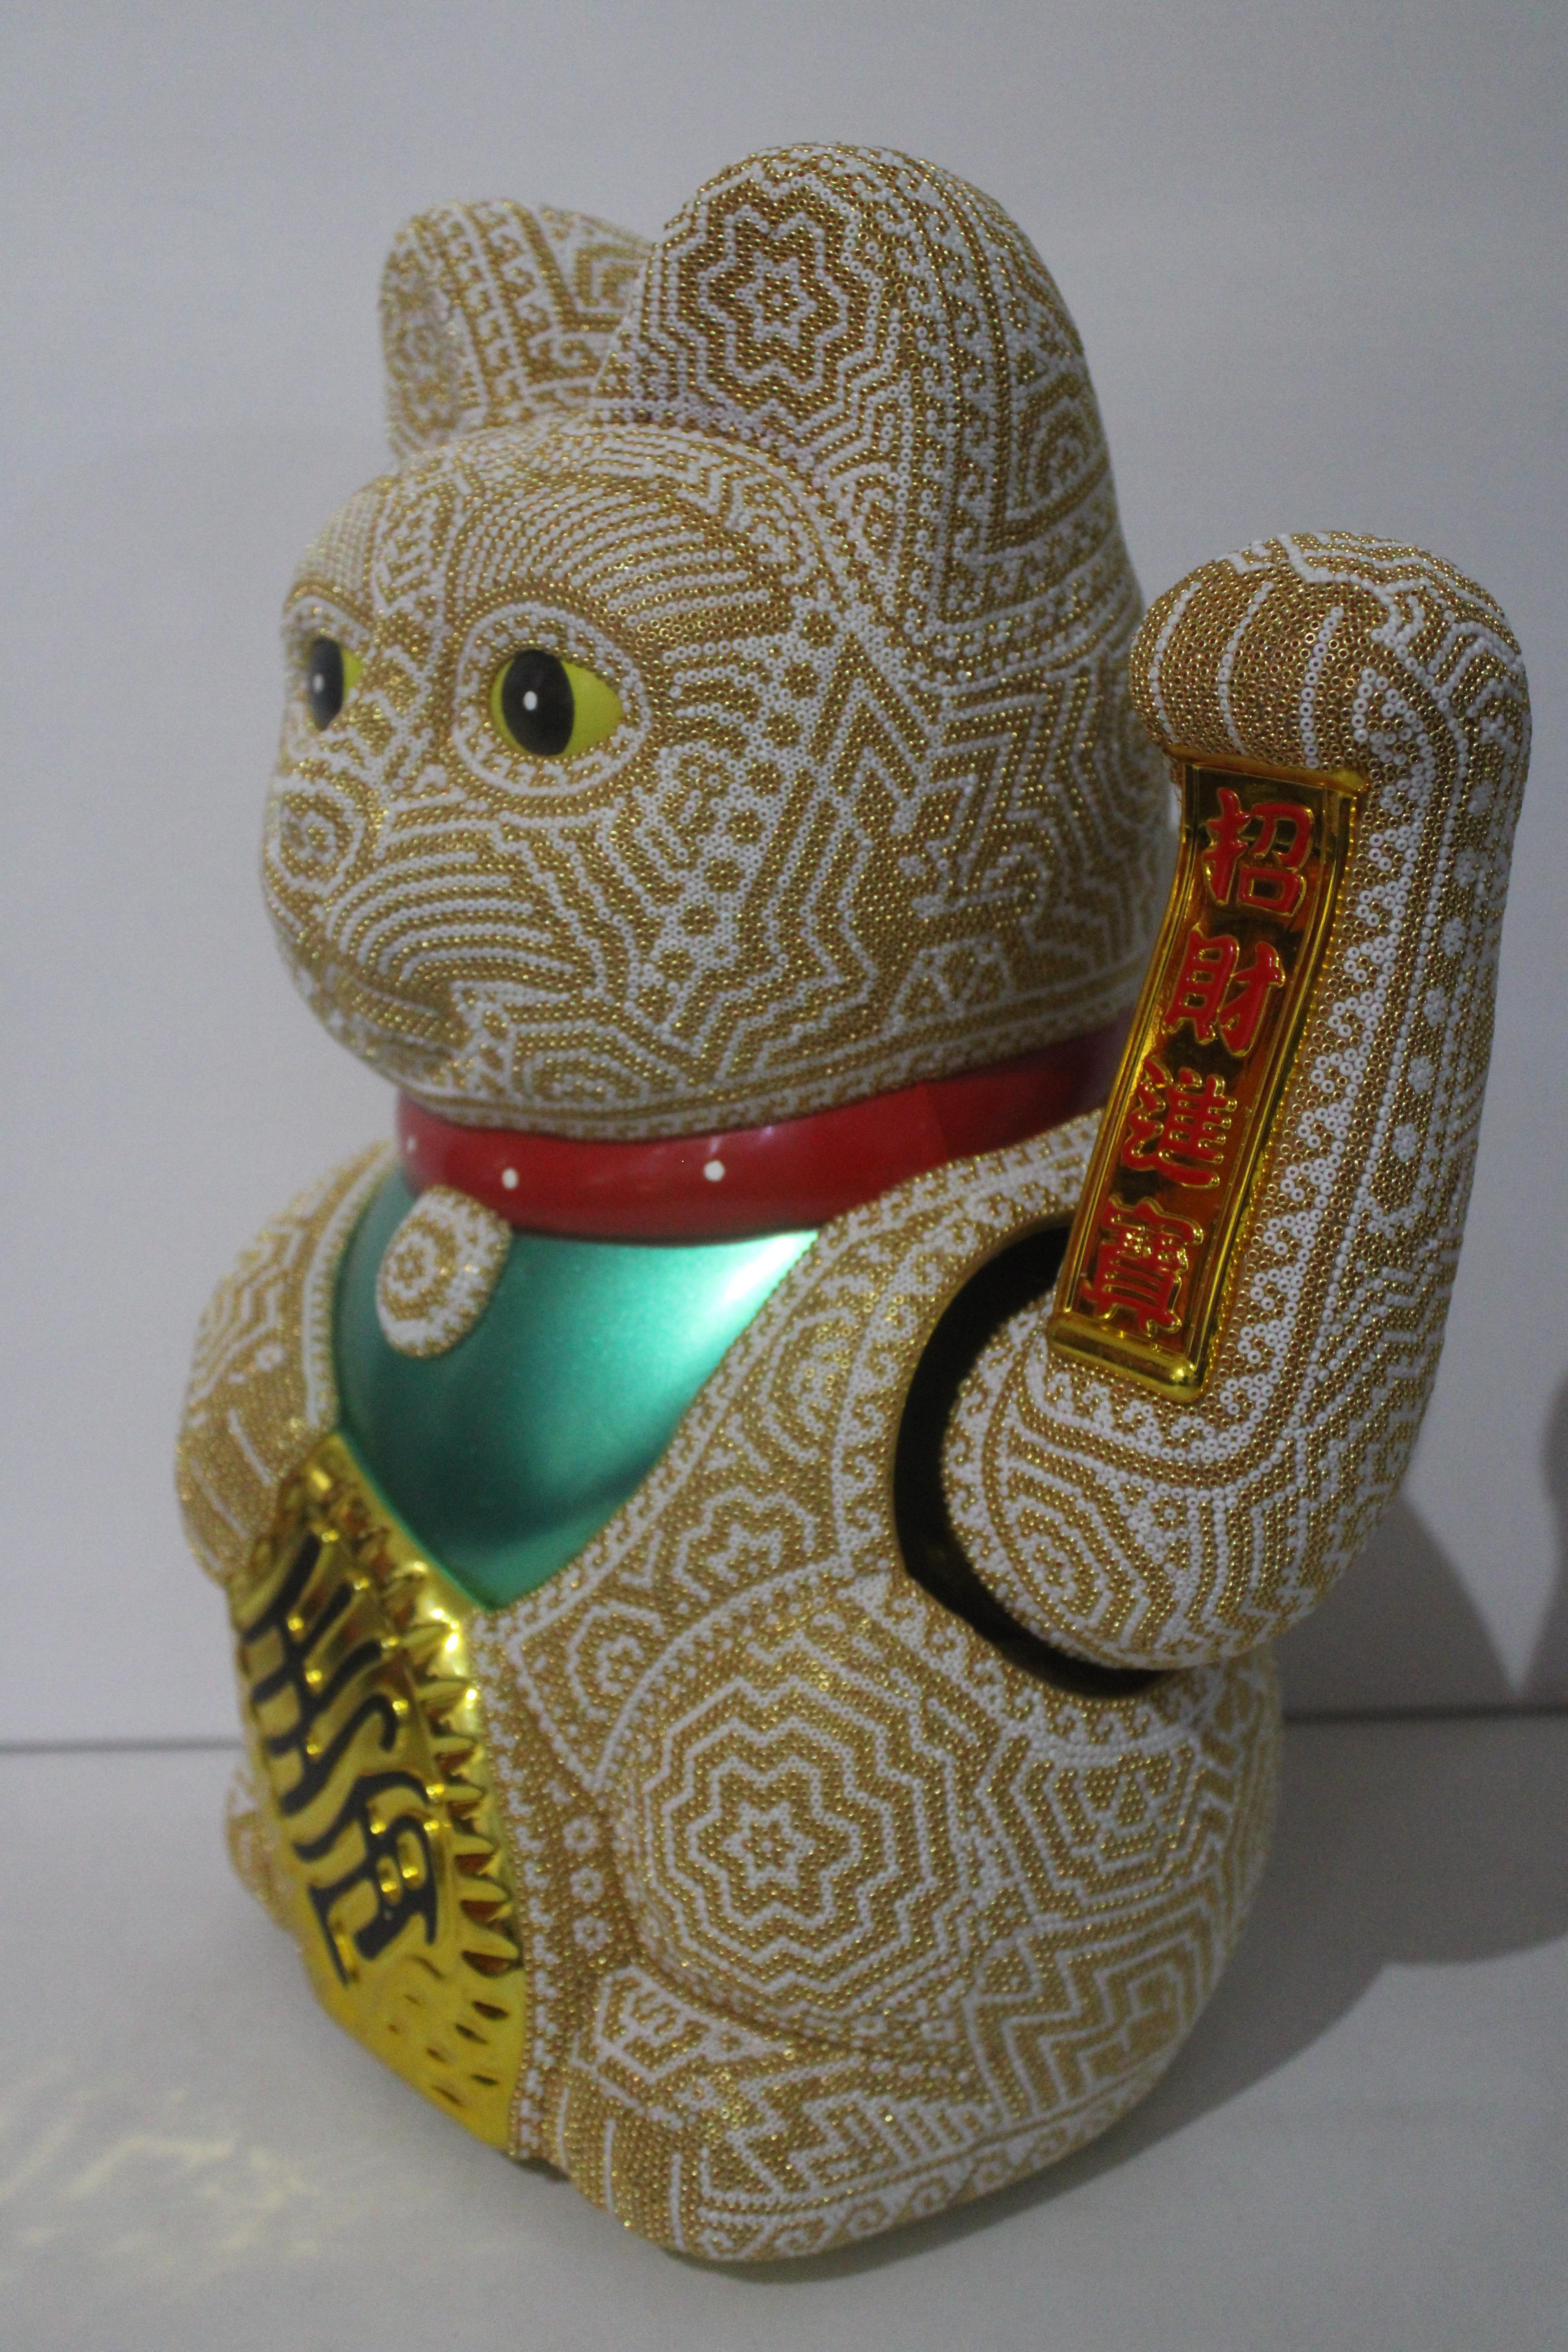 Large Money Cat from Huichol ALTERATIONS Series - Pop Art Sculpture by CHROMA aka Rick Wolfryd 